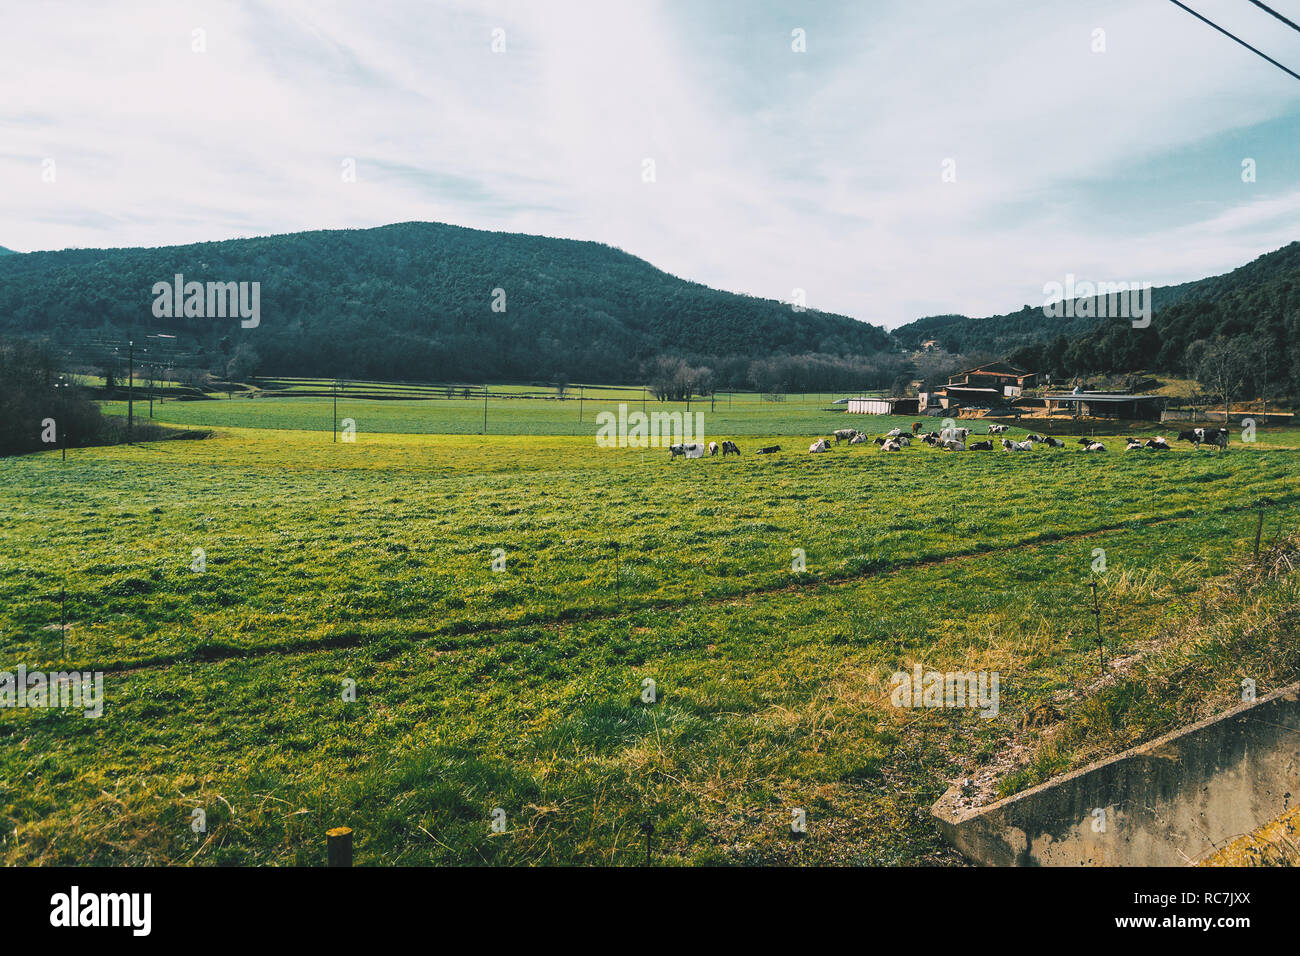 Sunny landscape with a group of cows and a farm in the background Stock Photo